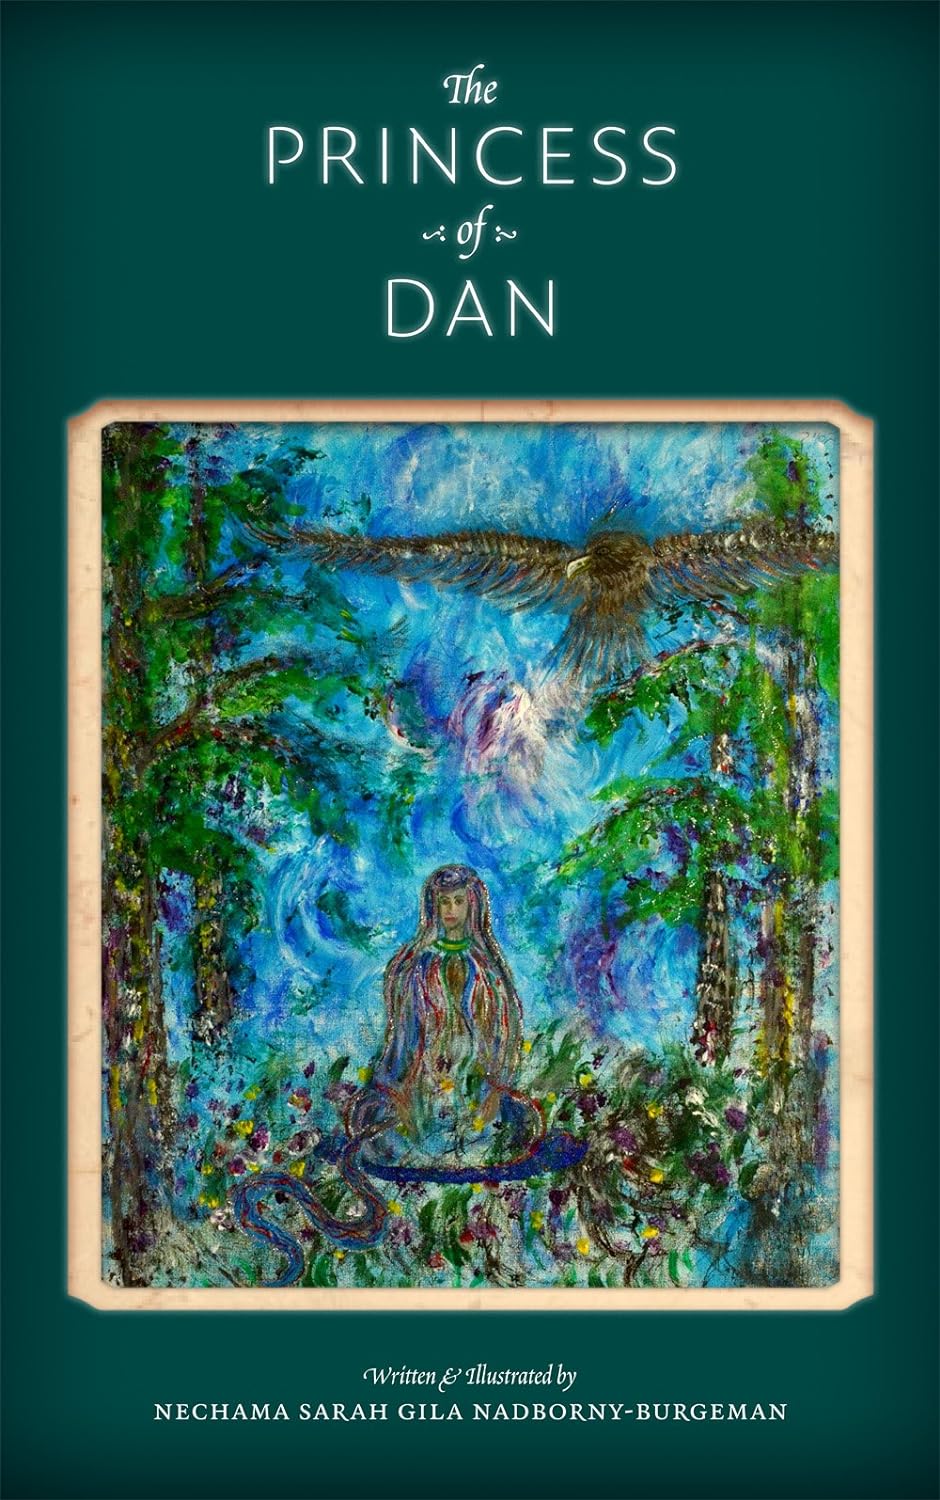 The Princess of Dan: A Novel About Redemption